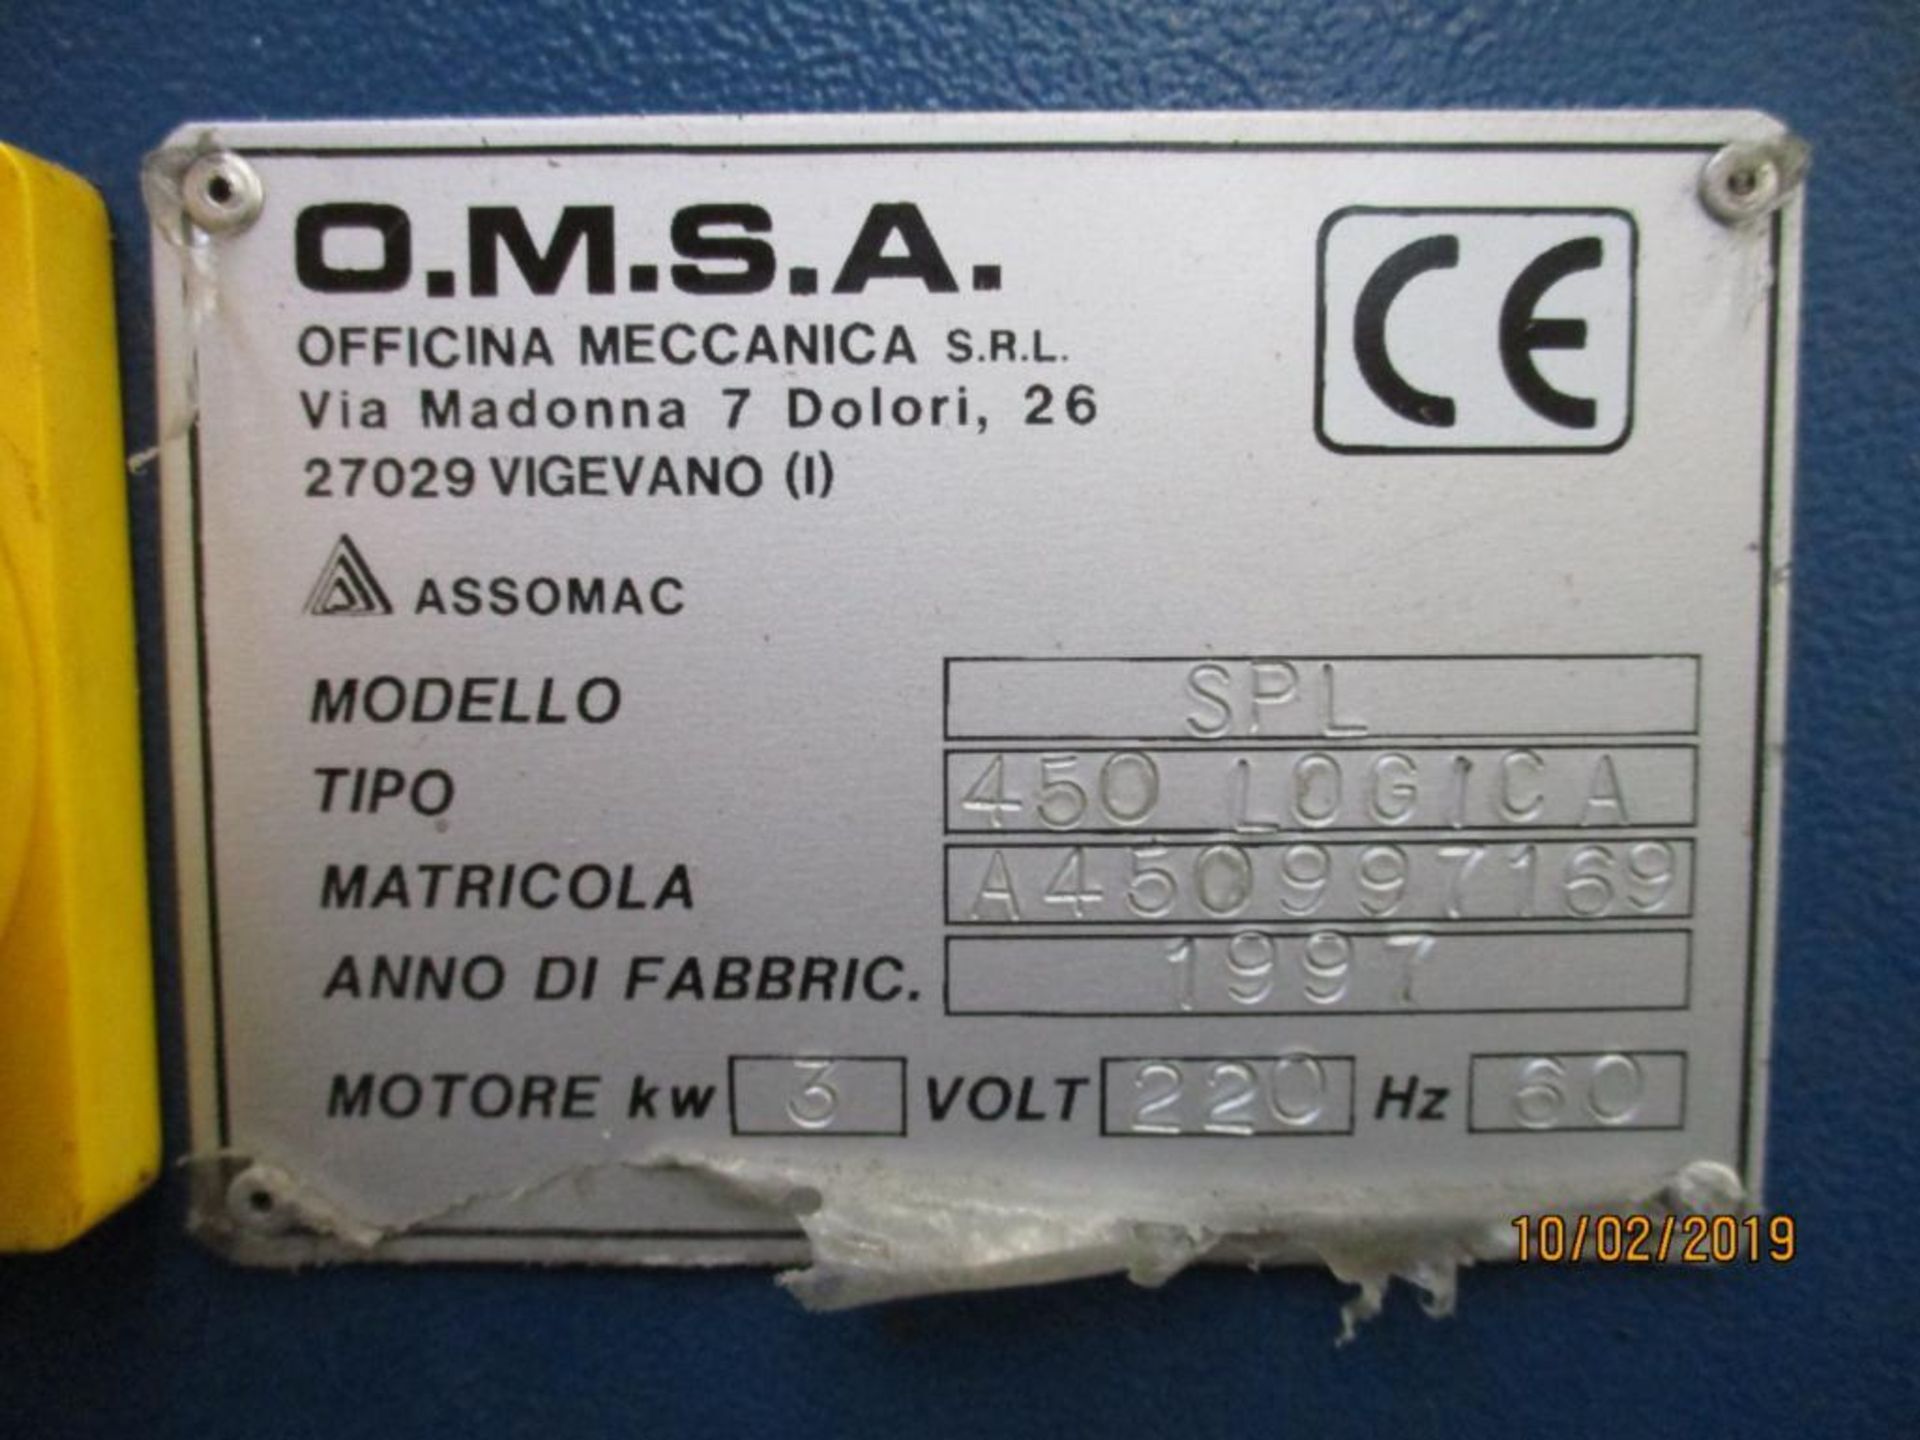 O.M.S.A. SPL 450 Logica Programmable Leather Splitting Machine S/N: A450997169 (1997) - Image 4 of 4